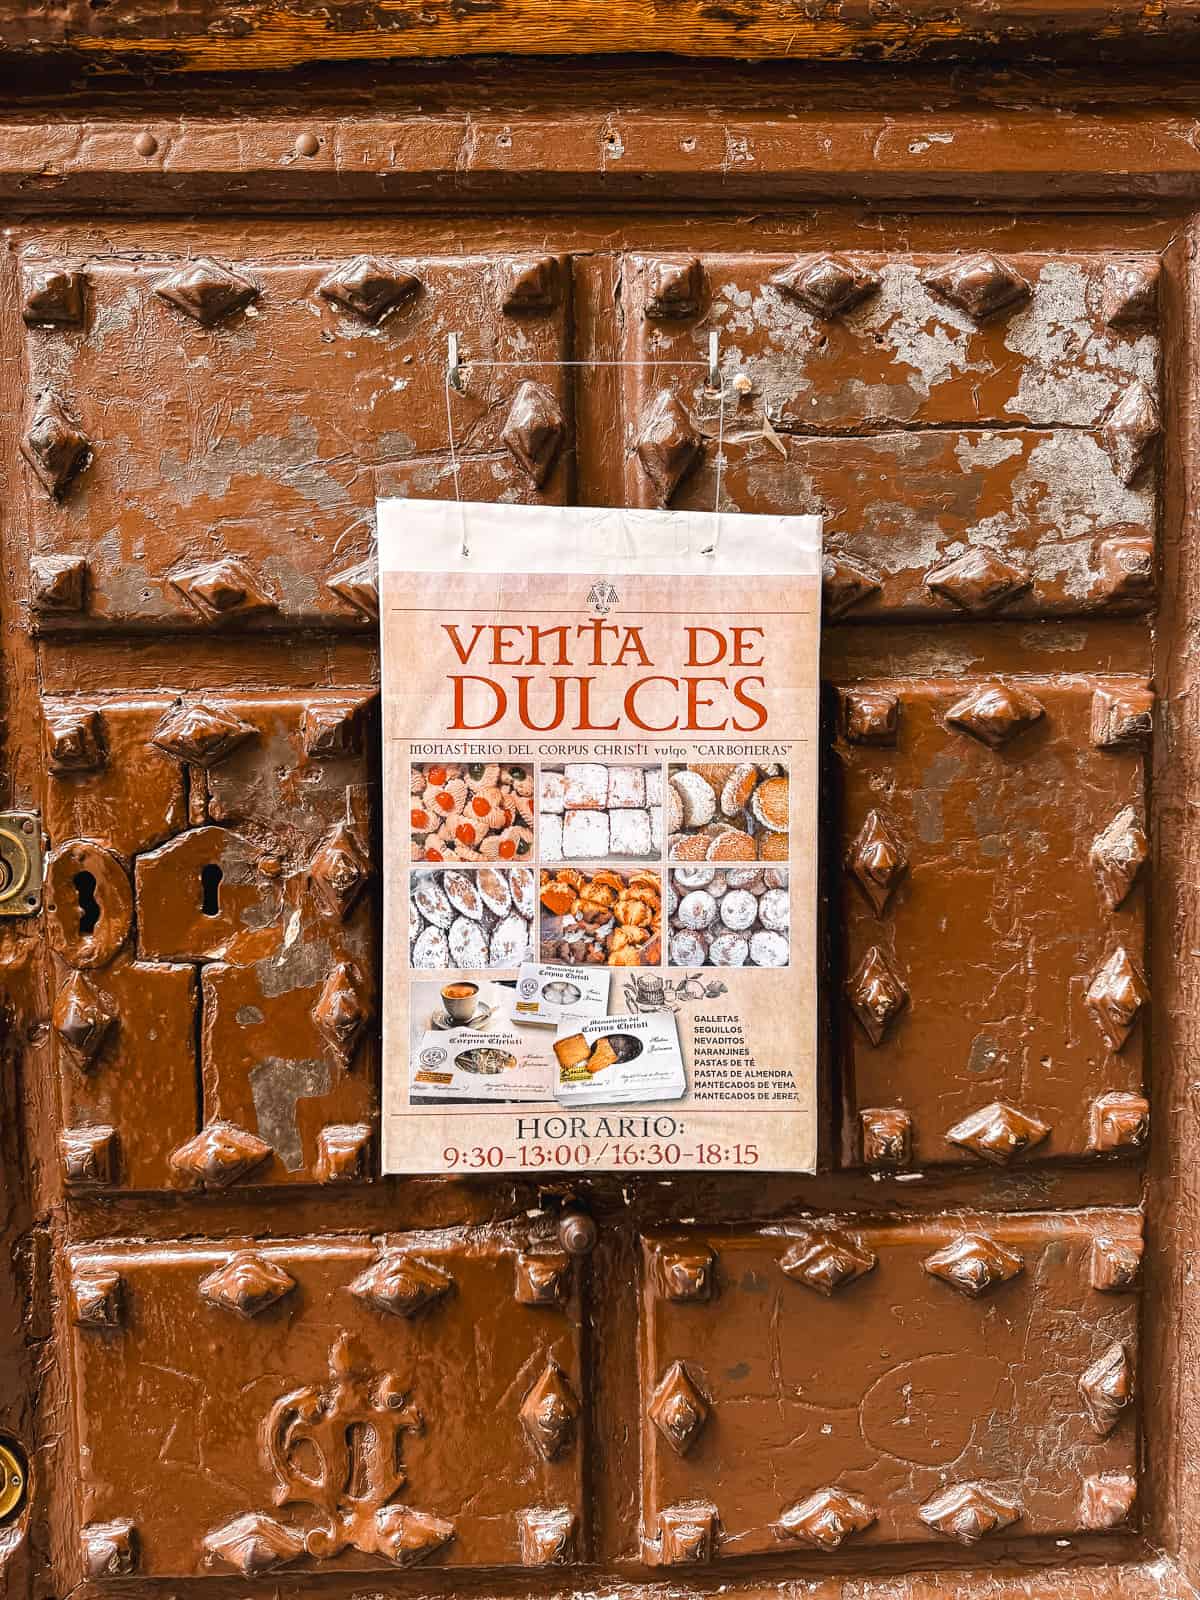 An aged wooden door displays a poster for 'Venta de Dulces' at the Monasterio del Corpus Christi, advertising traditional Spanish sweets with a schedule, evoking the historic charm of Madrid's convent confectioneries.